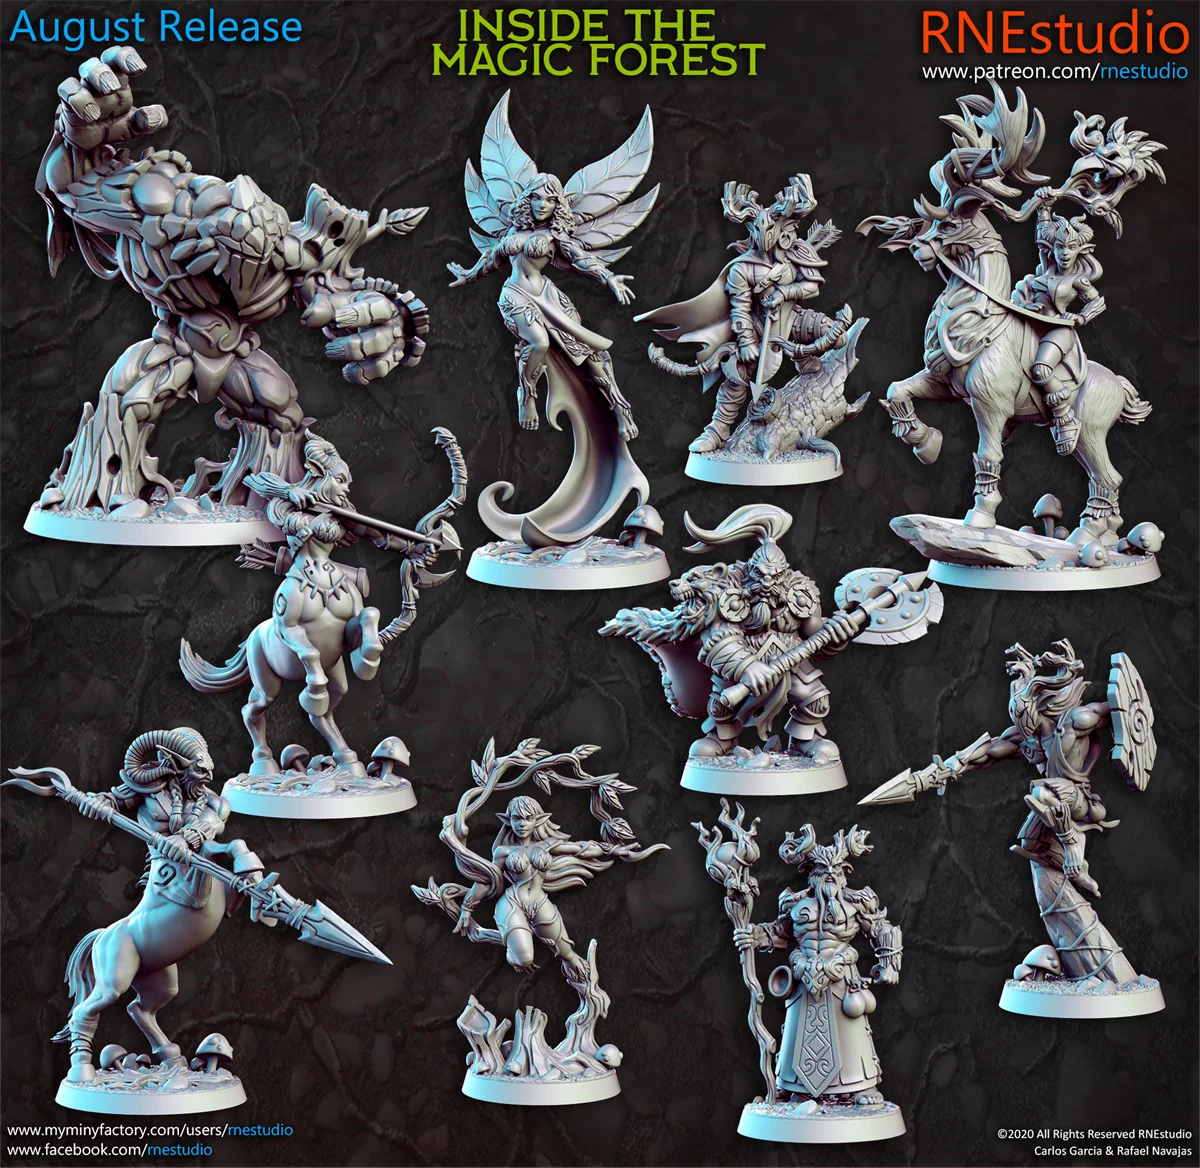 

Magic Forest Wood Elf Druid Archer Tree Human Dragon and Dungeon DND Running Team Board Game Chess Model